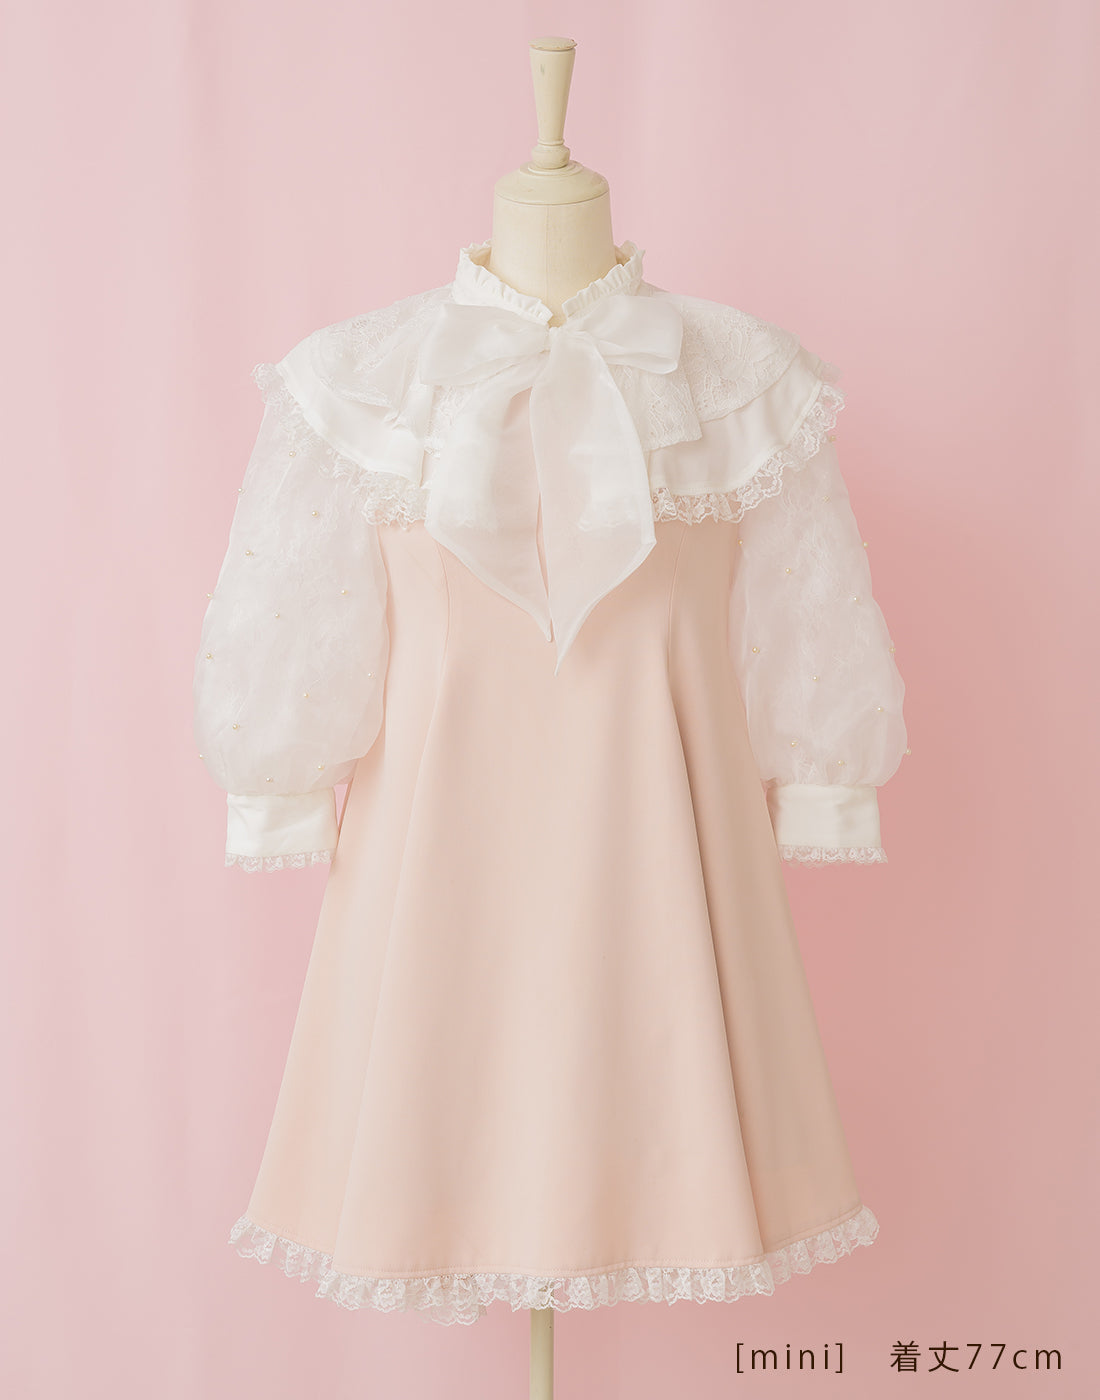 Lacy millefeuille frill collar ワンピース